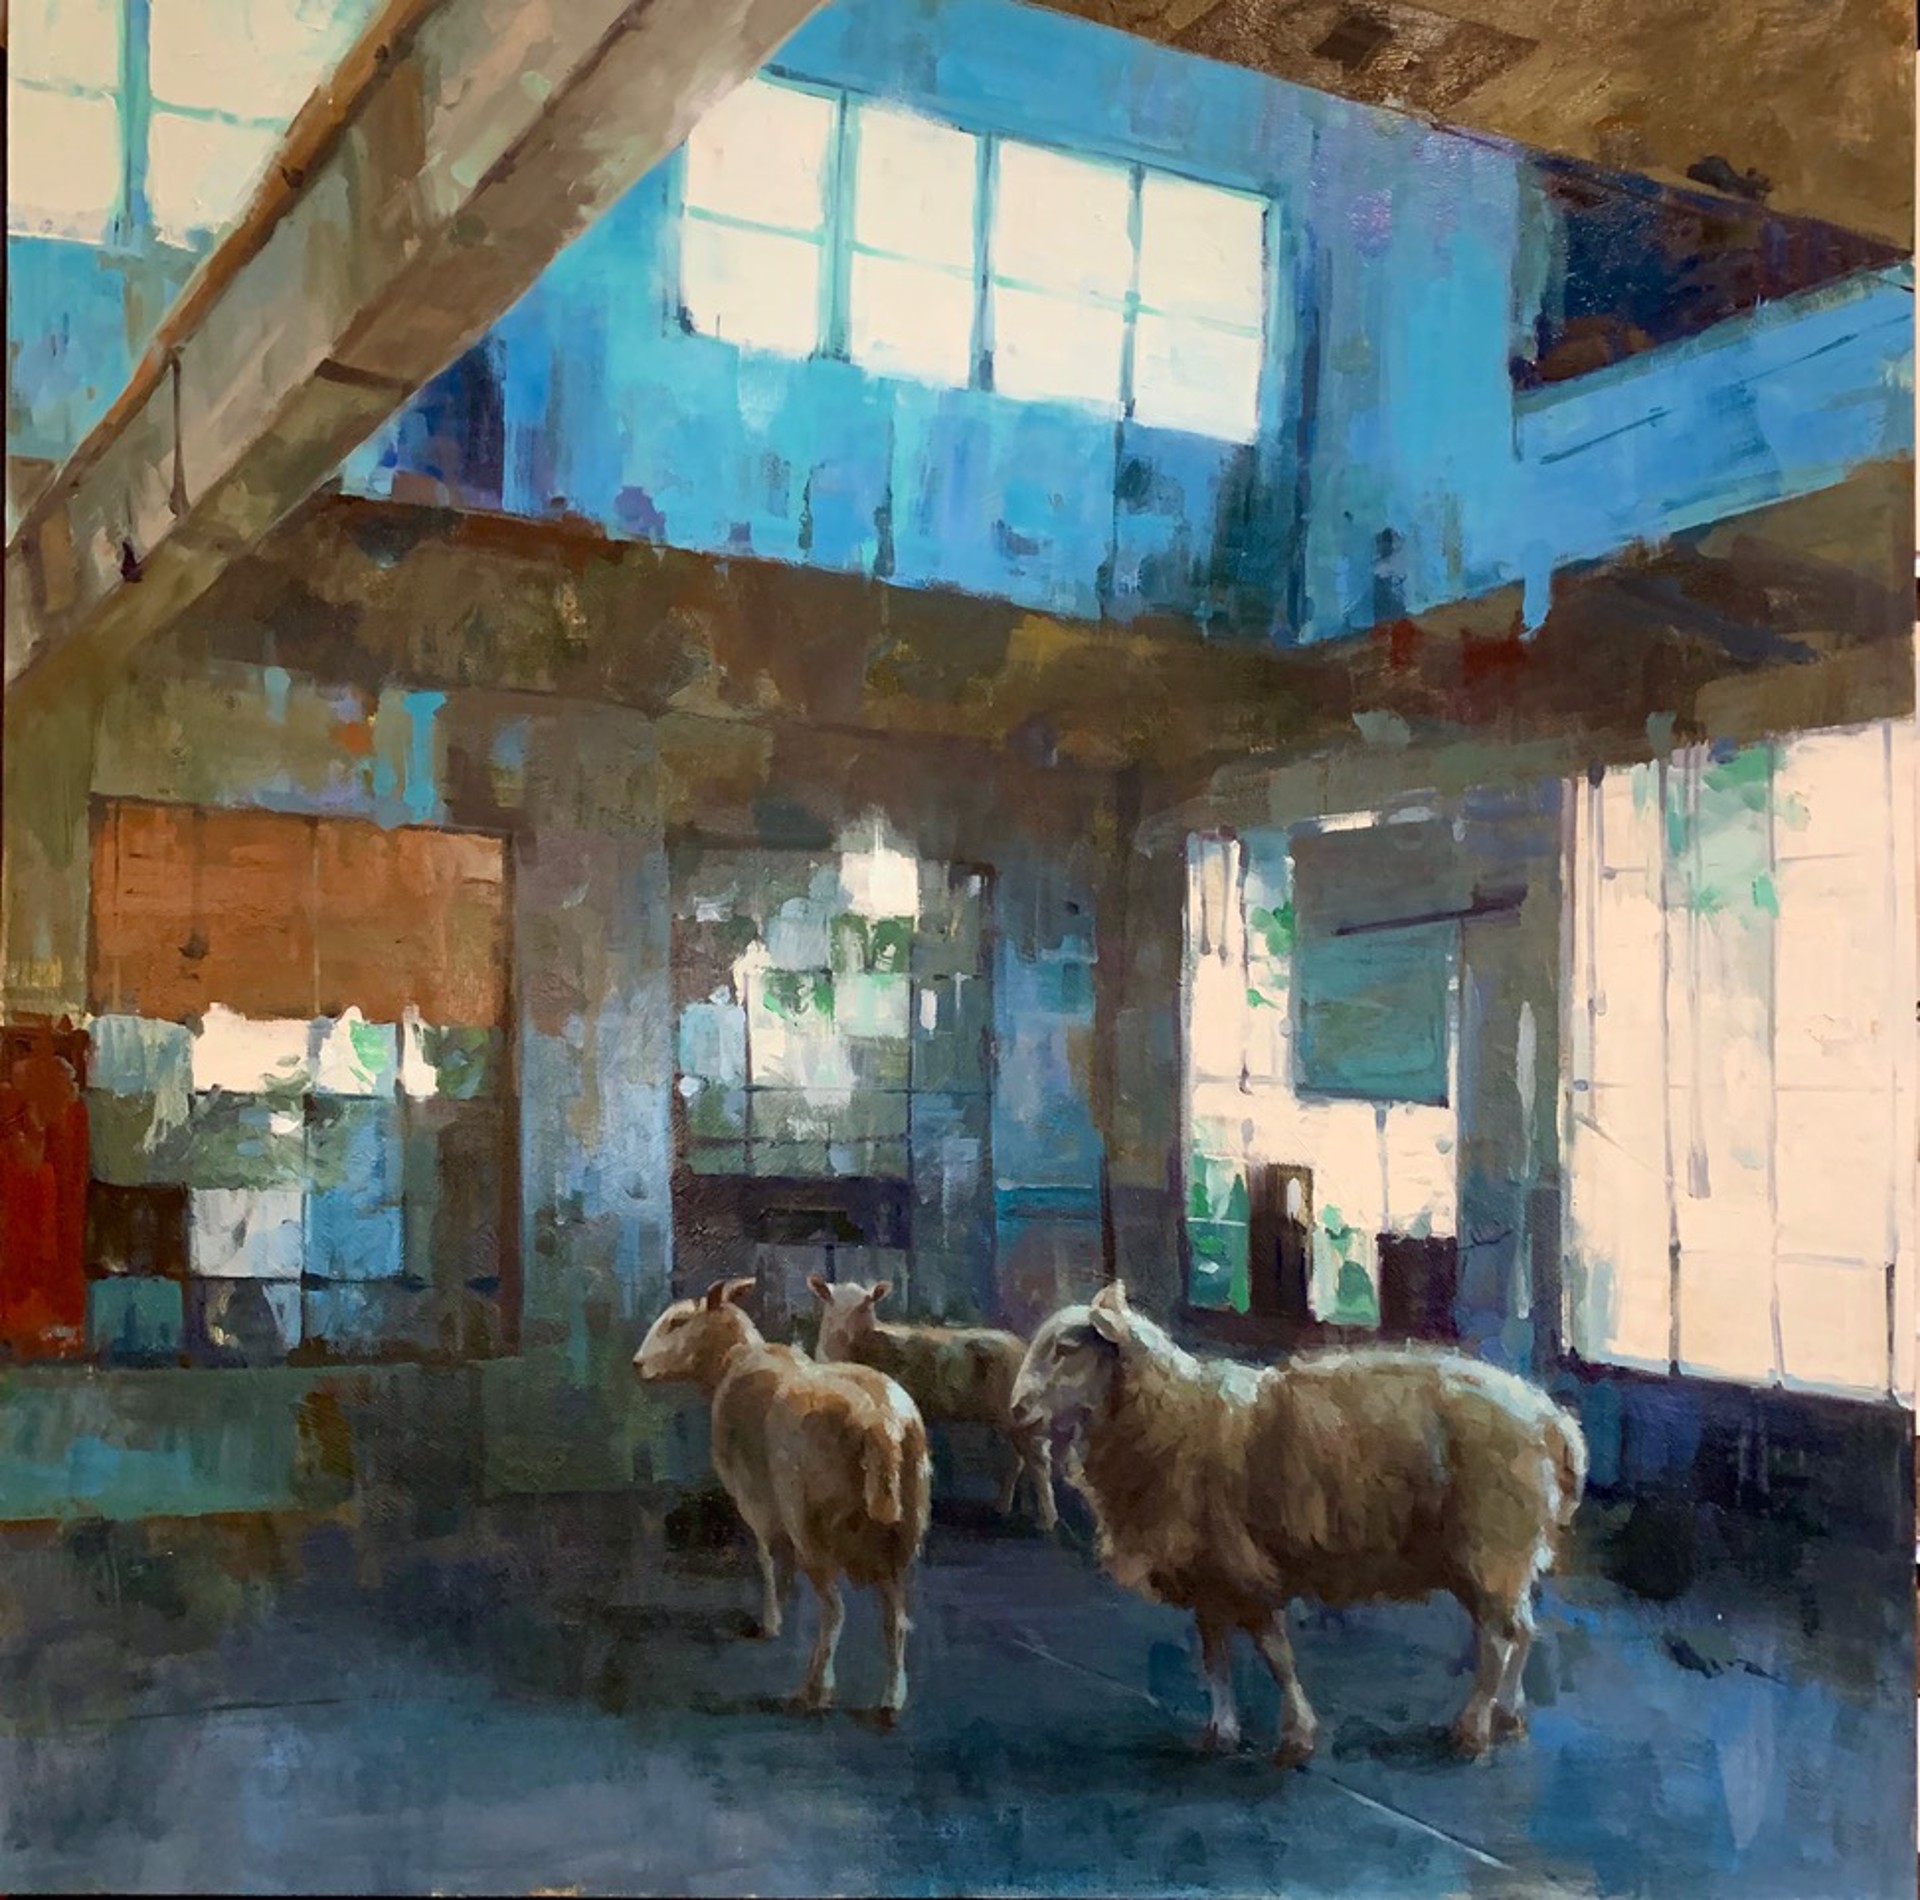 Thought Provoking Oil Painting Of Sheep Inside Abandoned Warehouse, By Larry Moore, Available At Gallery Wild 